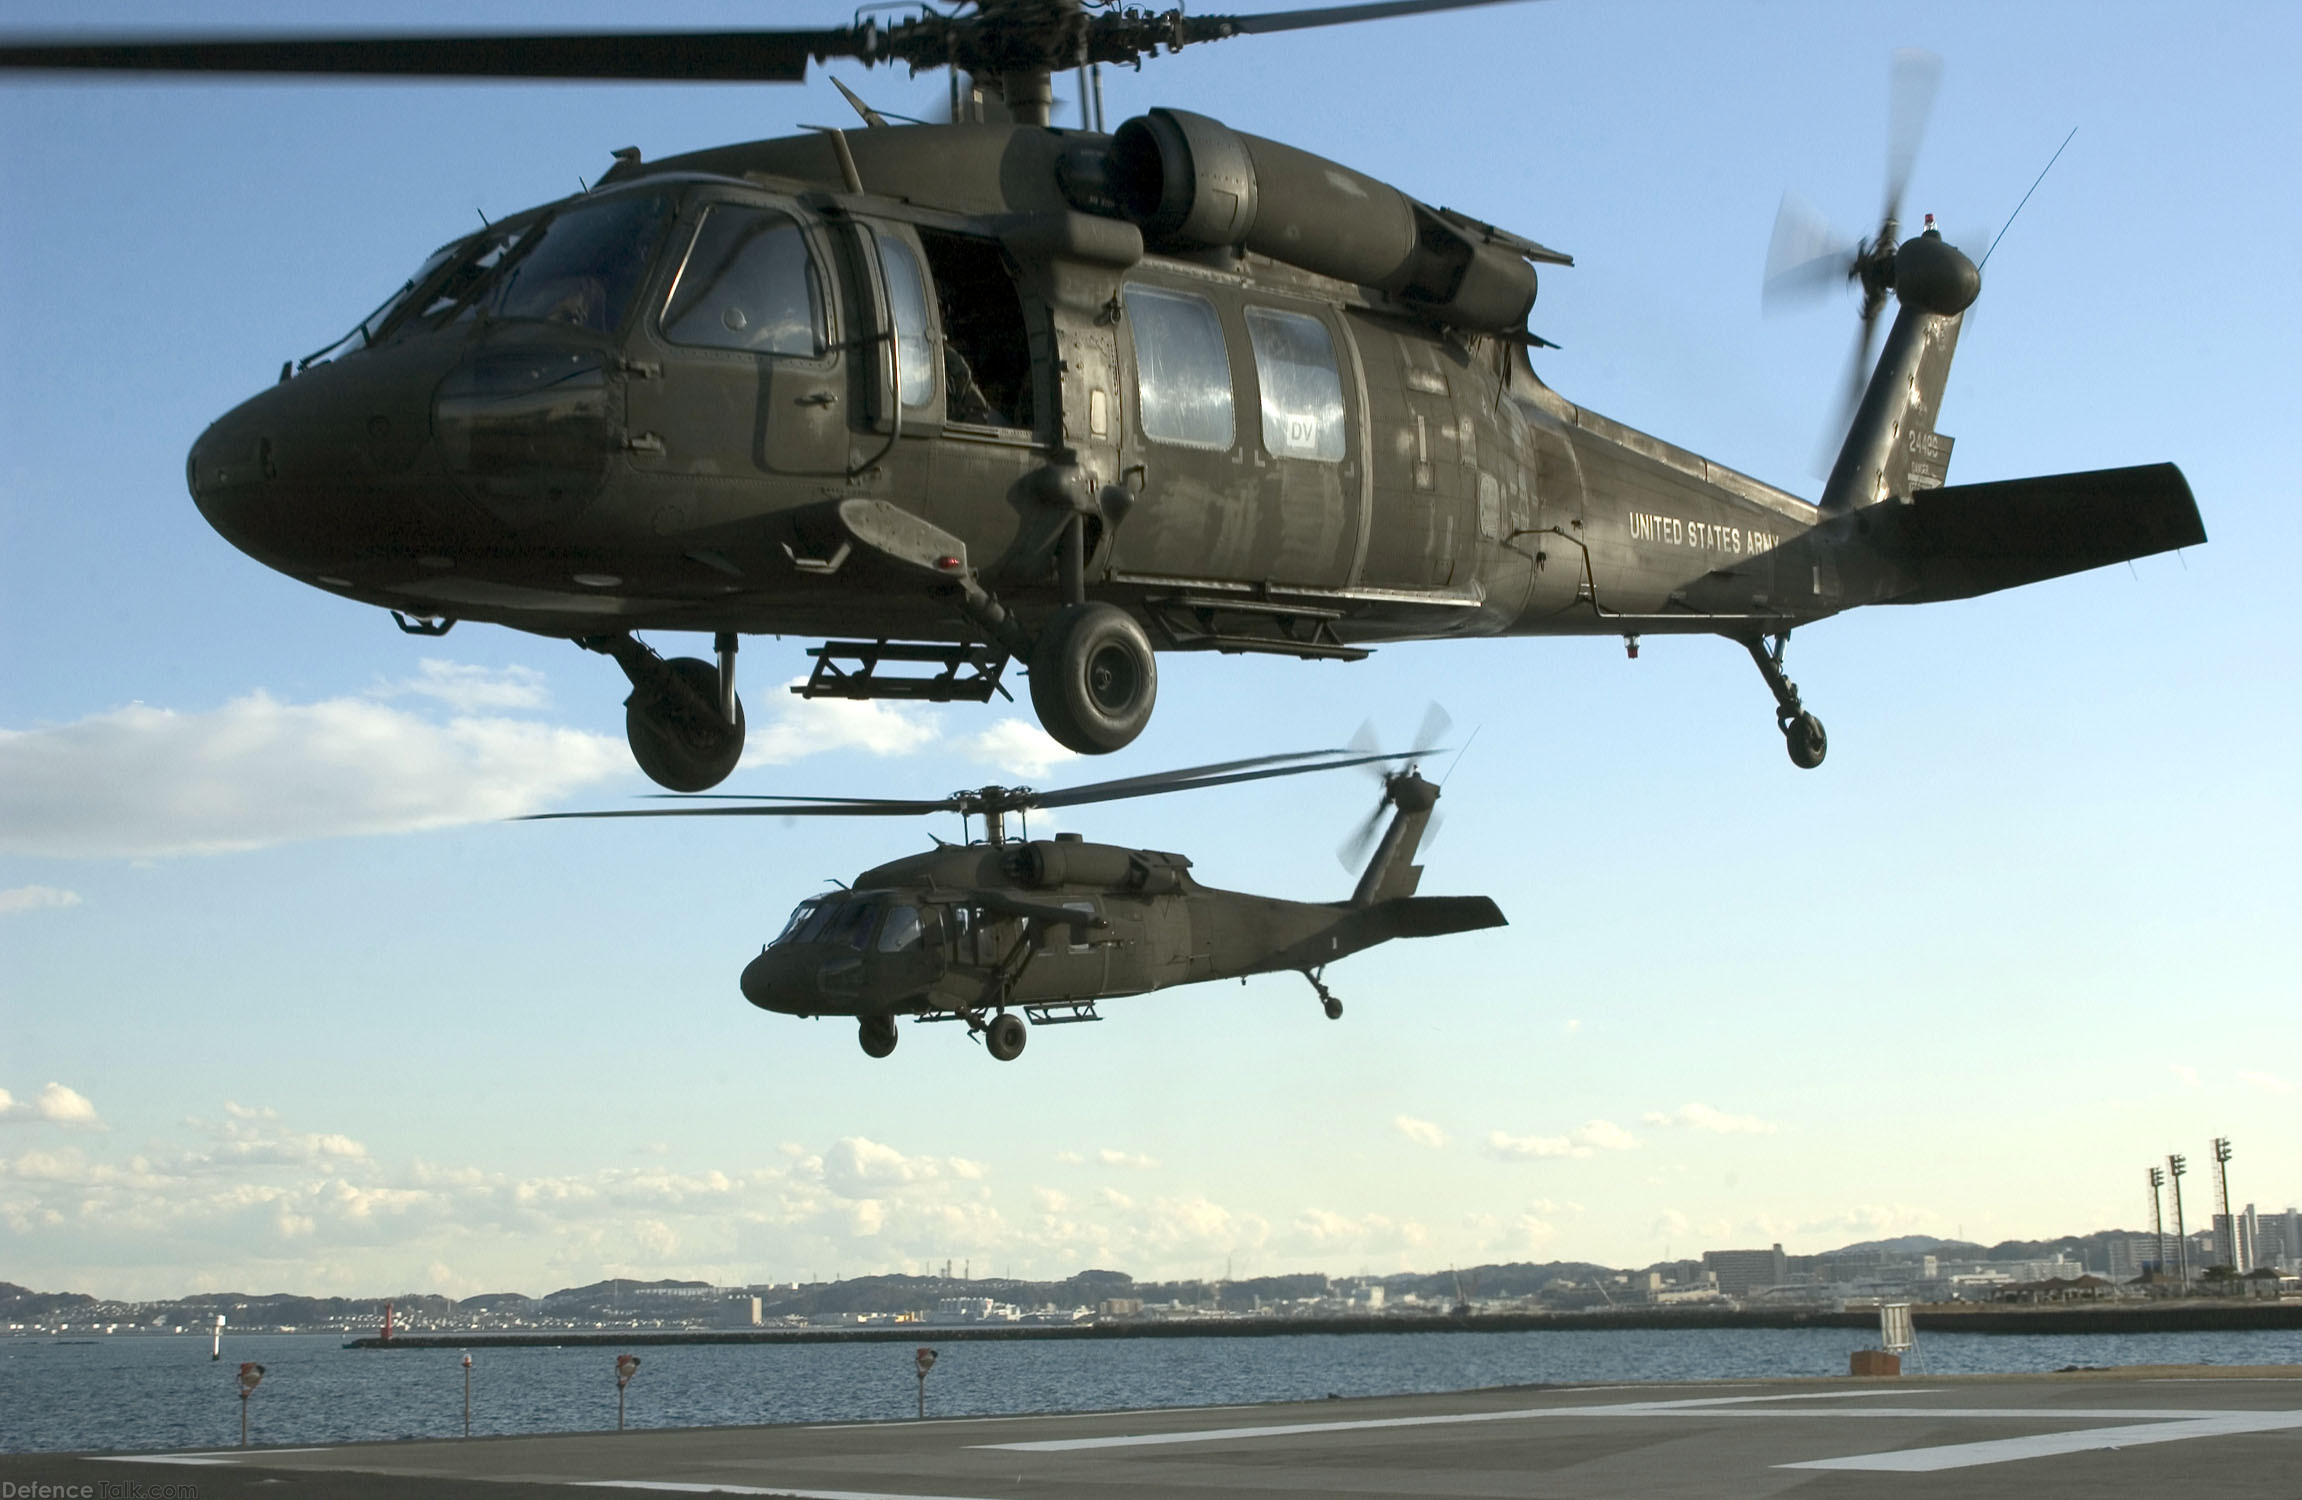 US Army UH-60A Black Hawk Helicopters